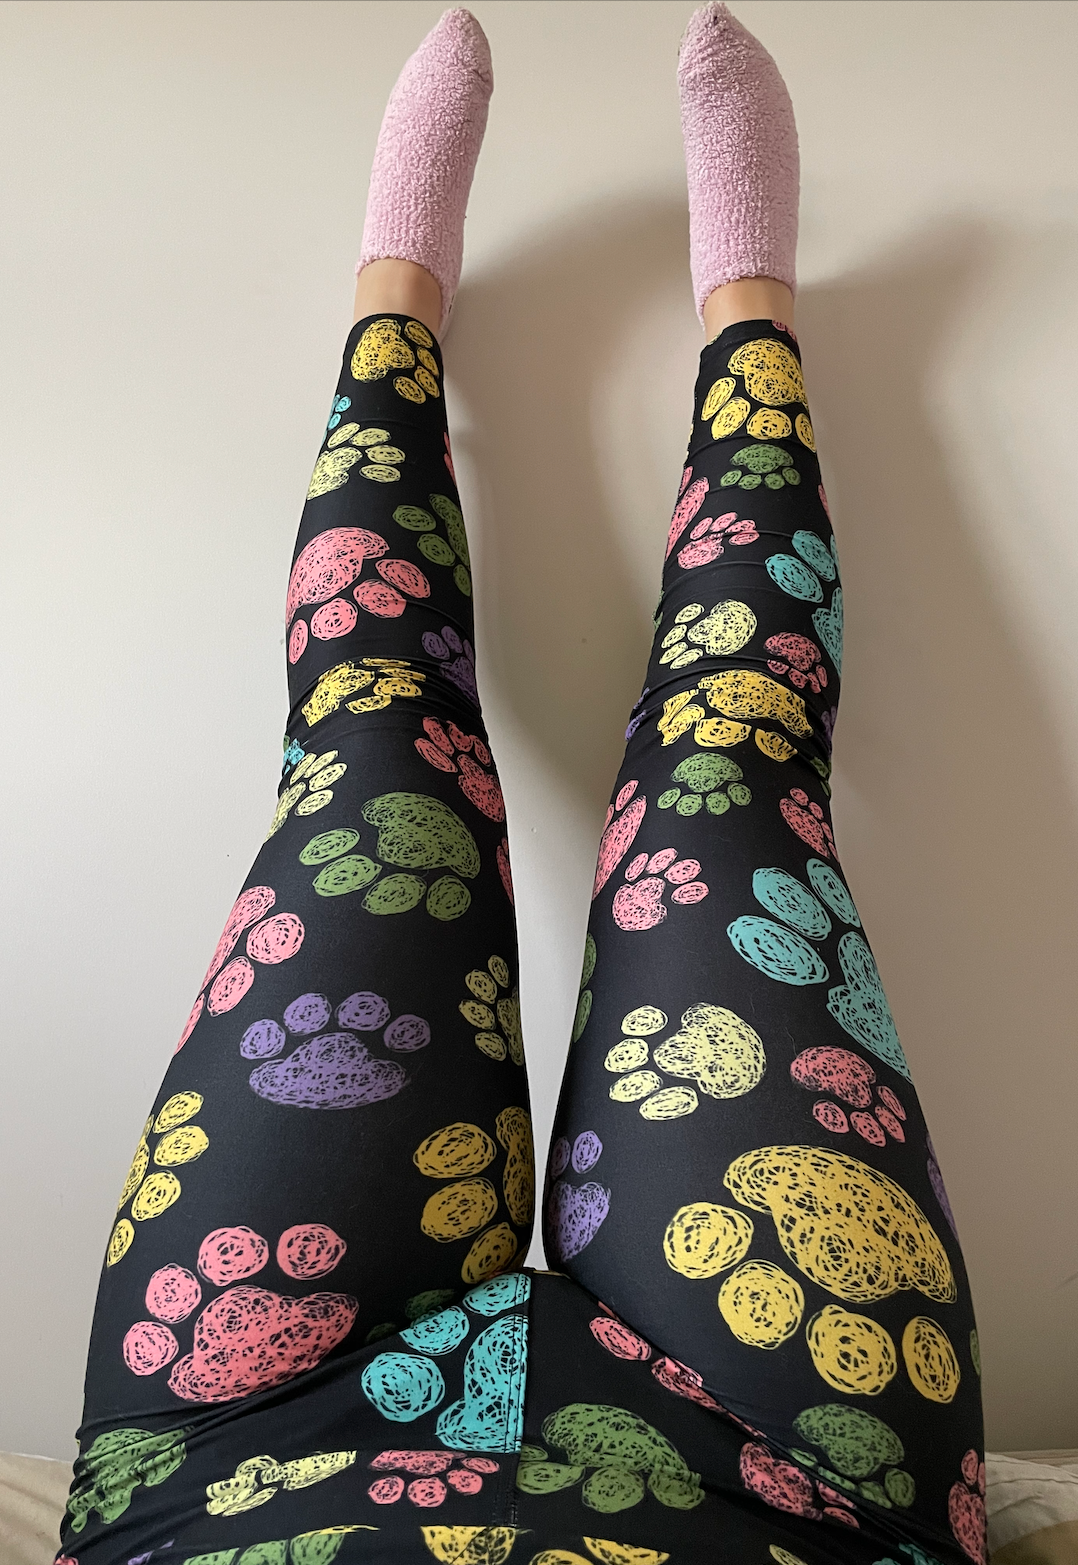 Paws for Thought Leggings - Kids and Adults